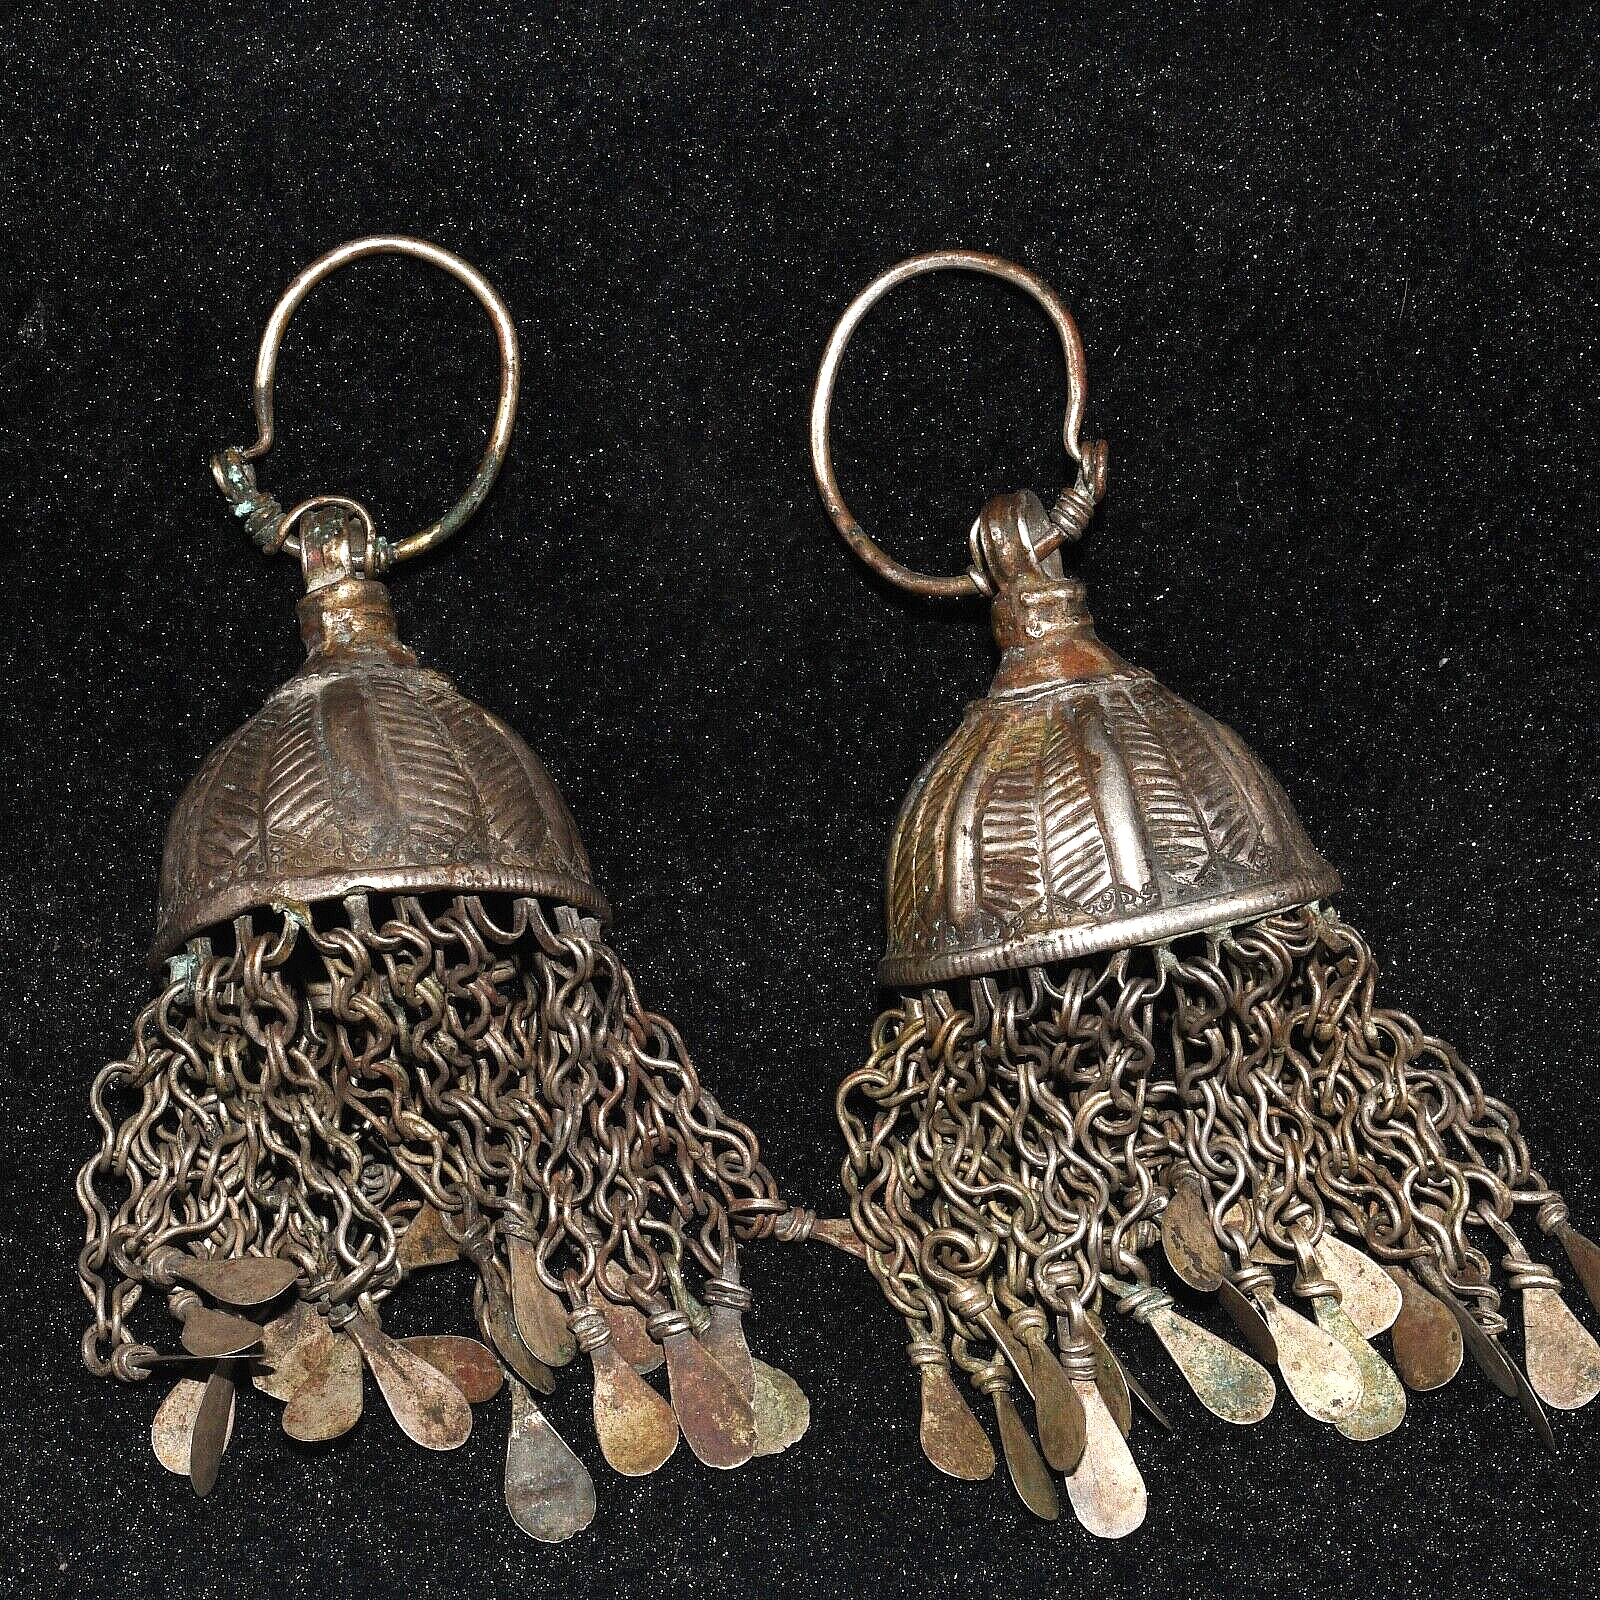 Ancient Sasanian Sassanid Silver Earrings in very Good Condition C. 224 - 651 AD